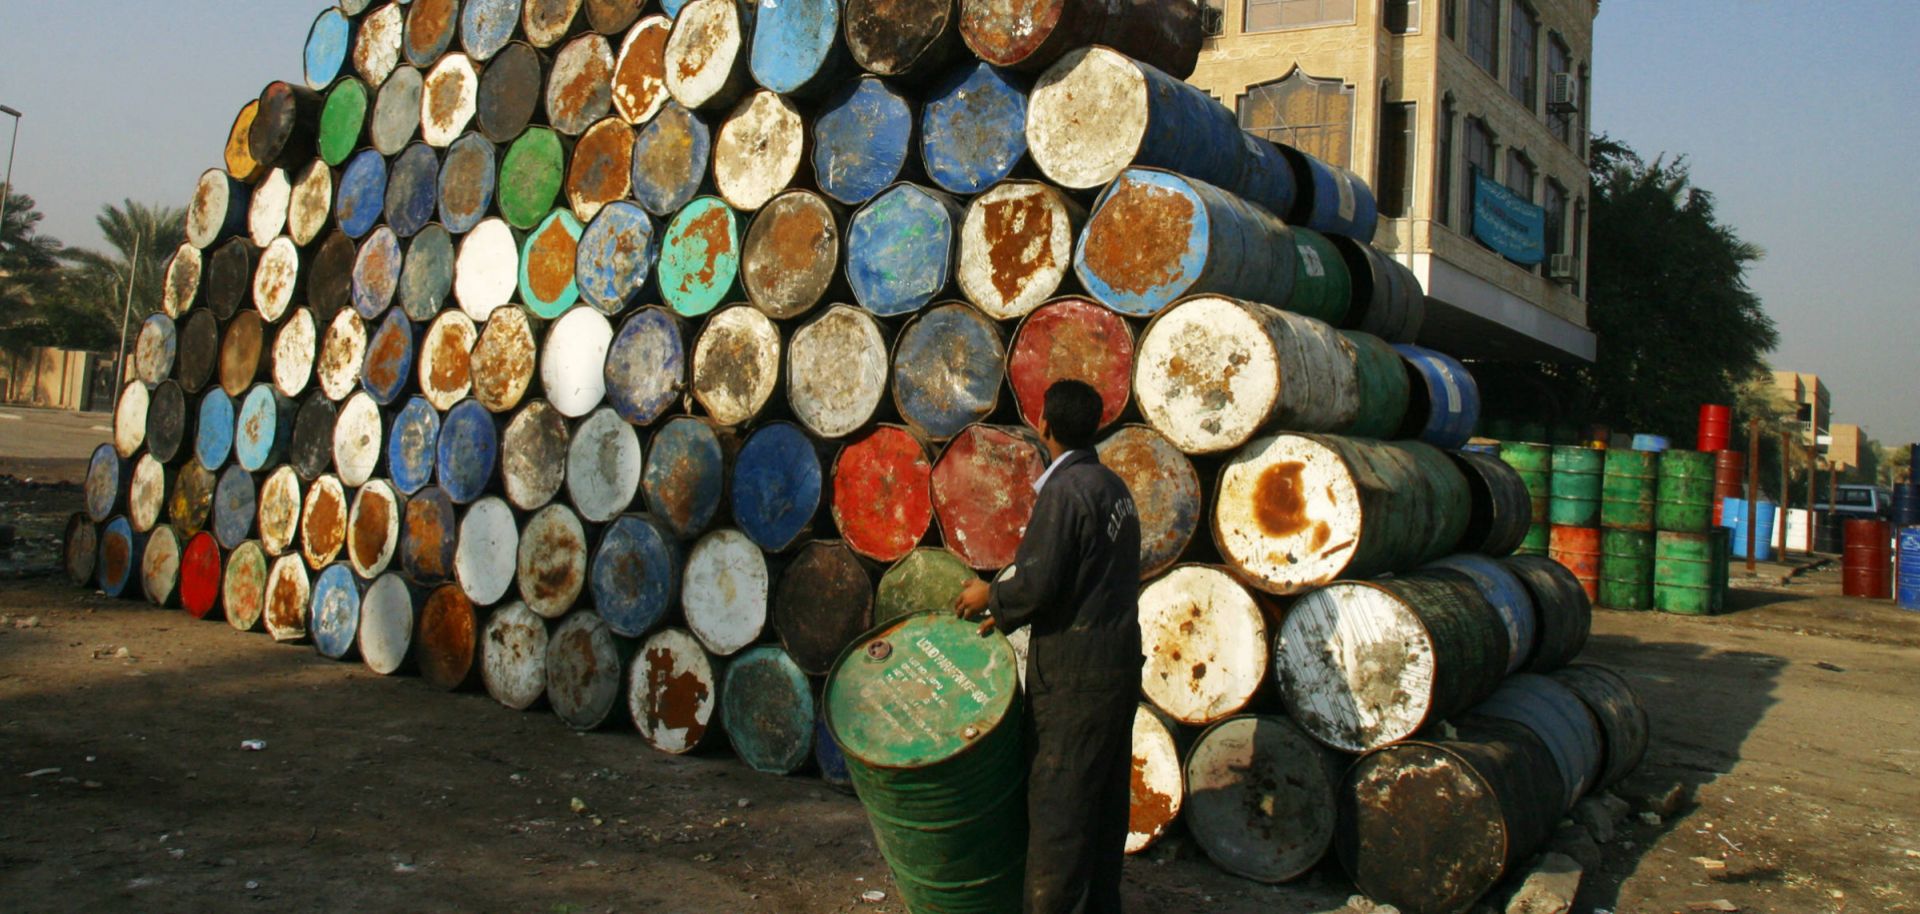 A worker surveys a stack of empty oil drums as he brings another to add to it at a warehouse in Baghdad, Iraq, on Jan. 6, 2004.